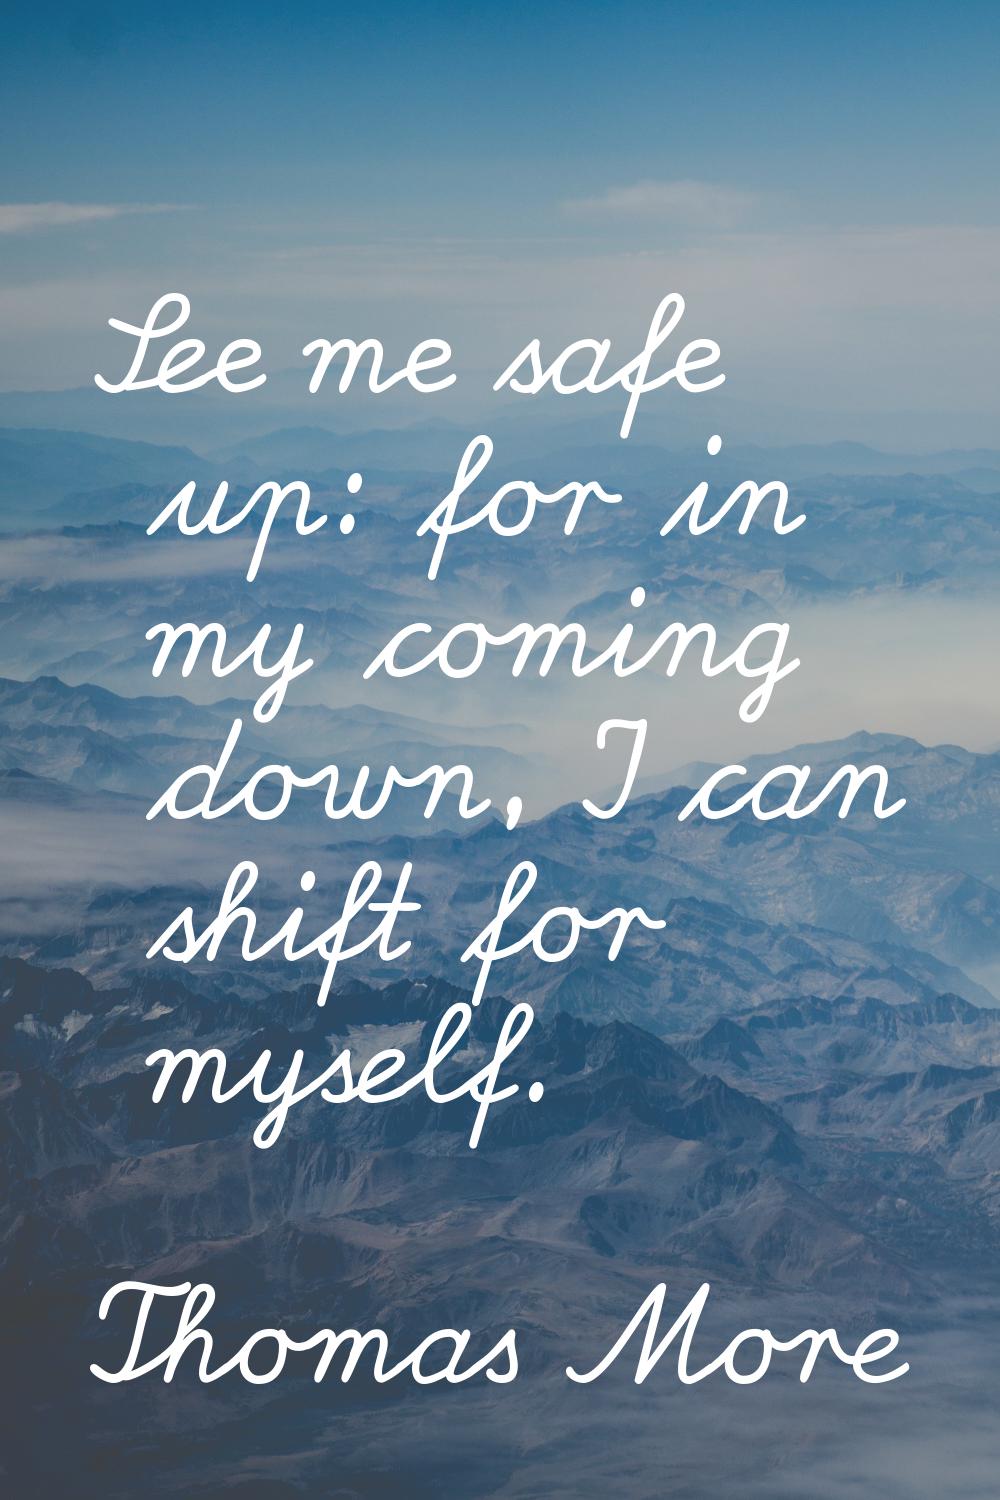 See me safe up: for in my coming down, I can shift for myself.